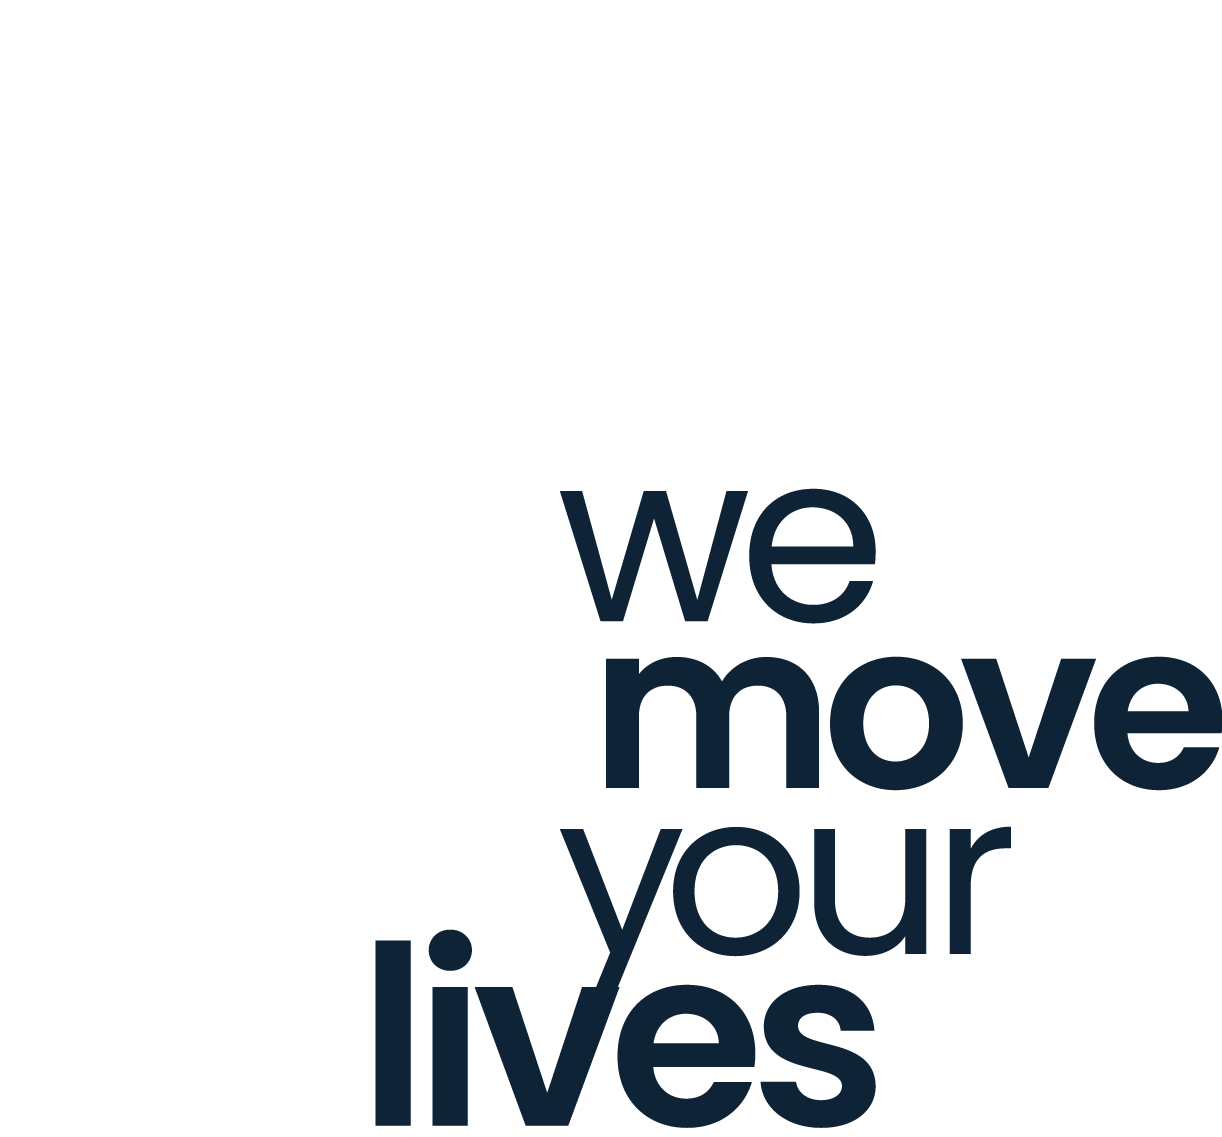 We move your lives